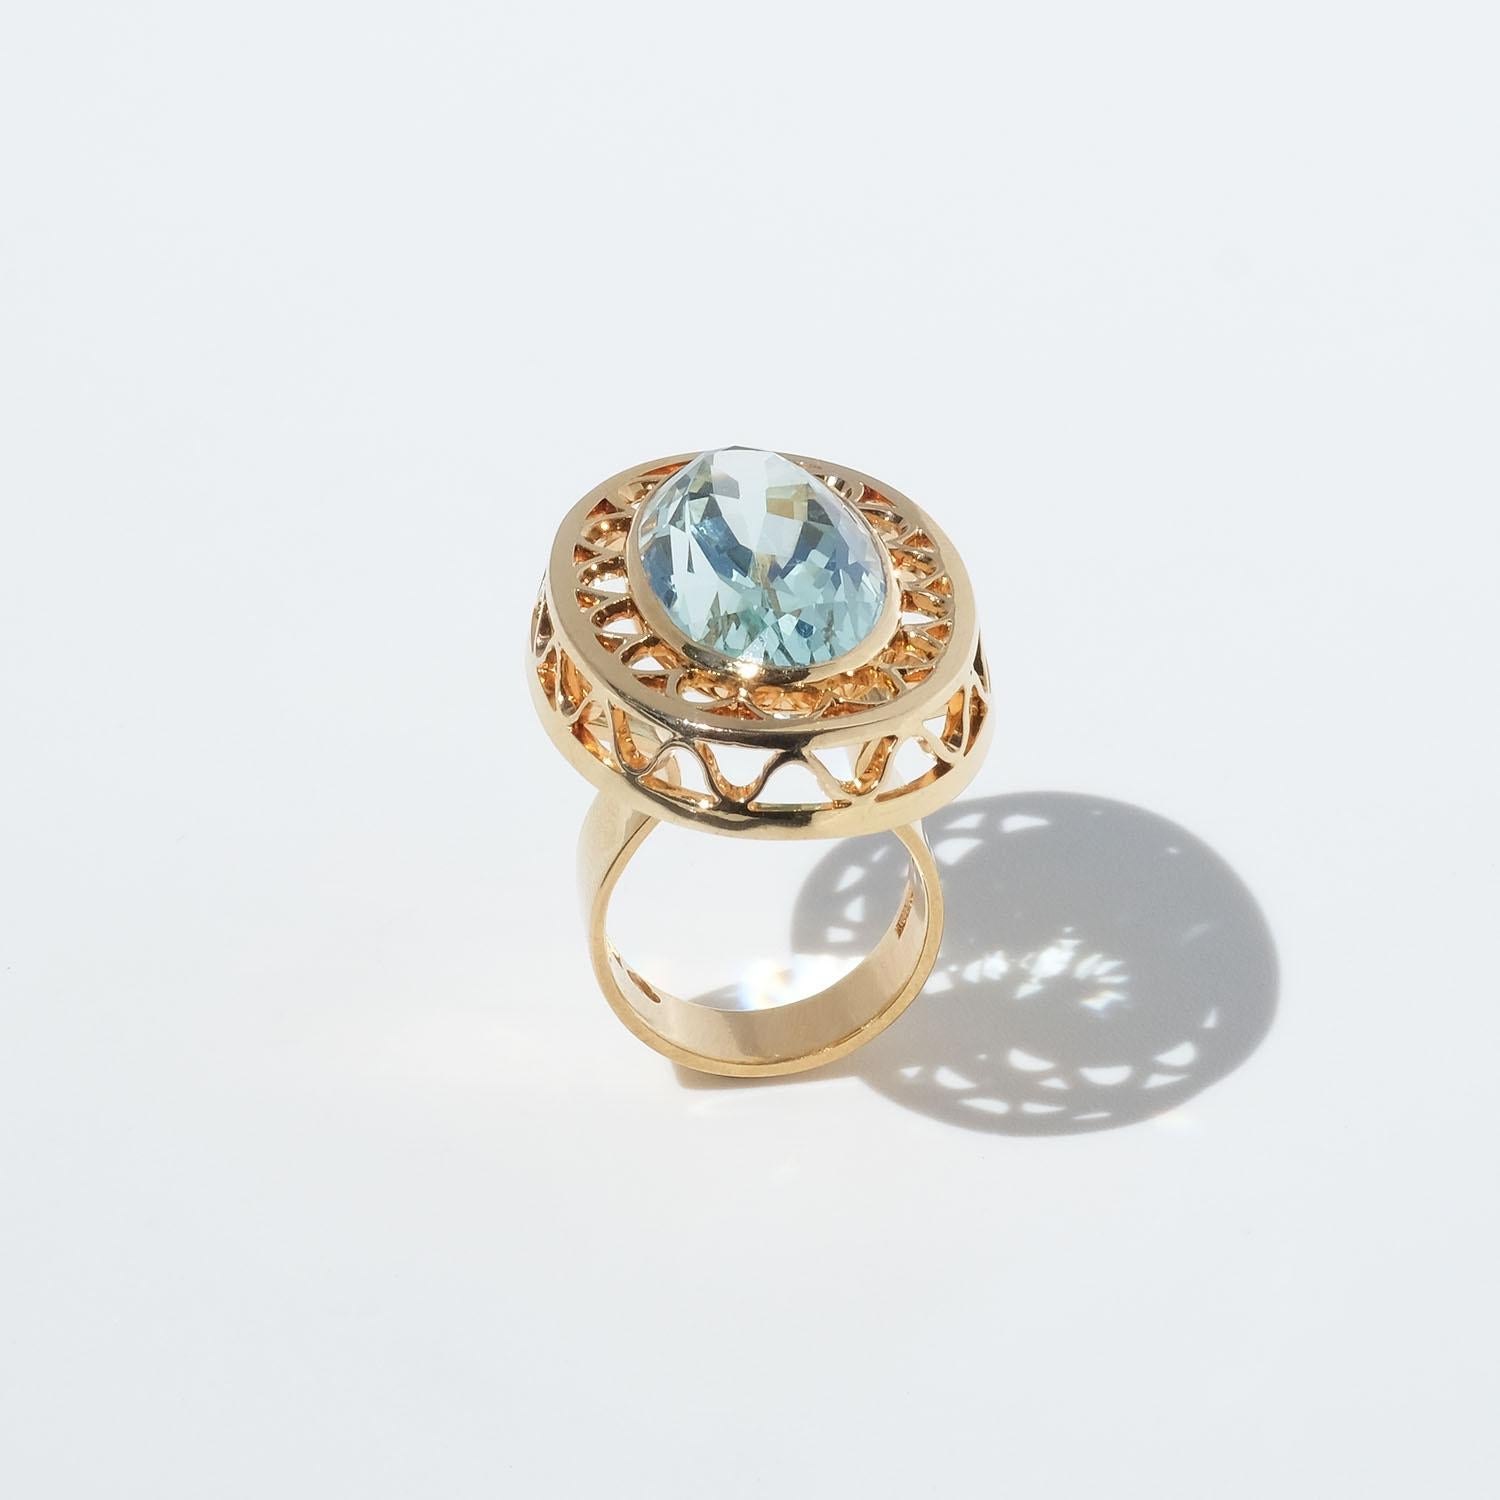 Vintage 18k Gold and Aquamarine Ring by Master Anders Högberg Year, 1977 For Sale 6